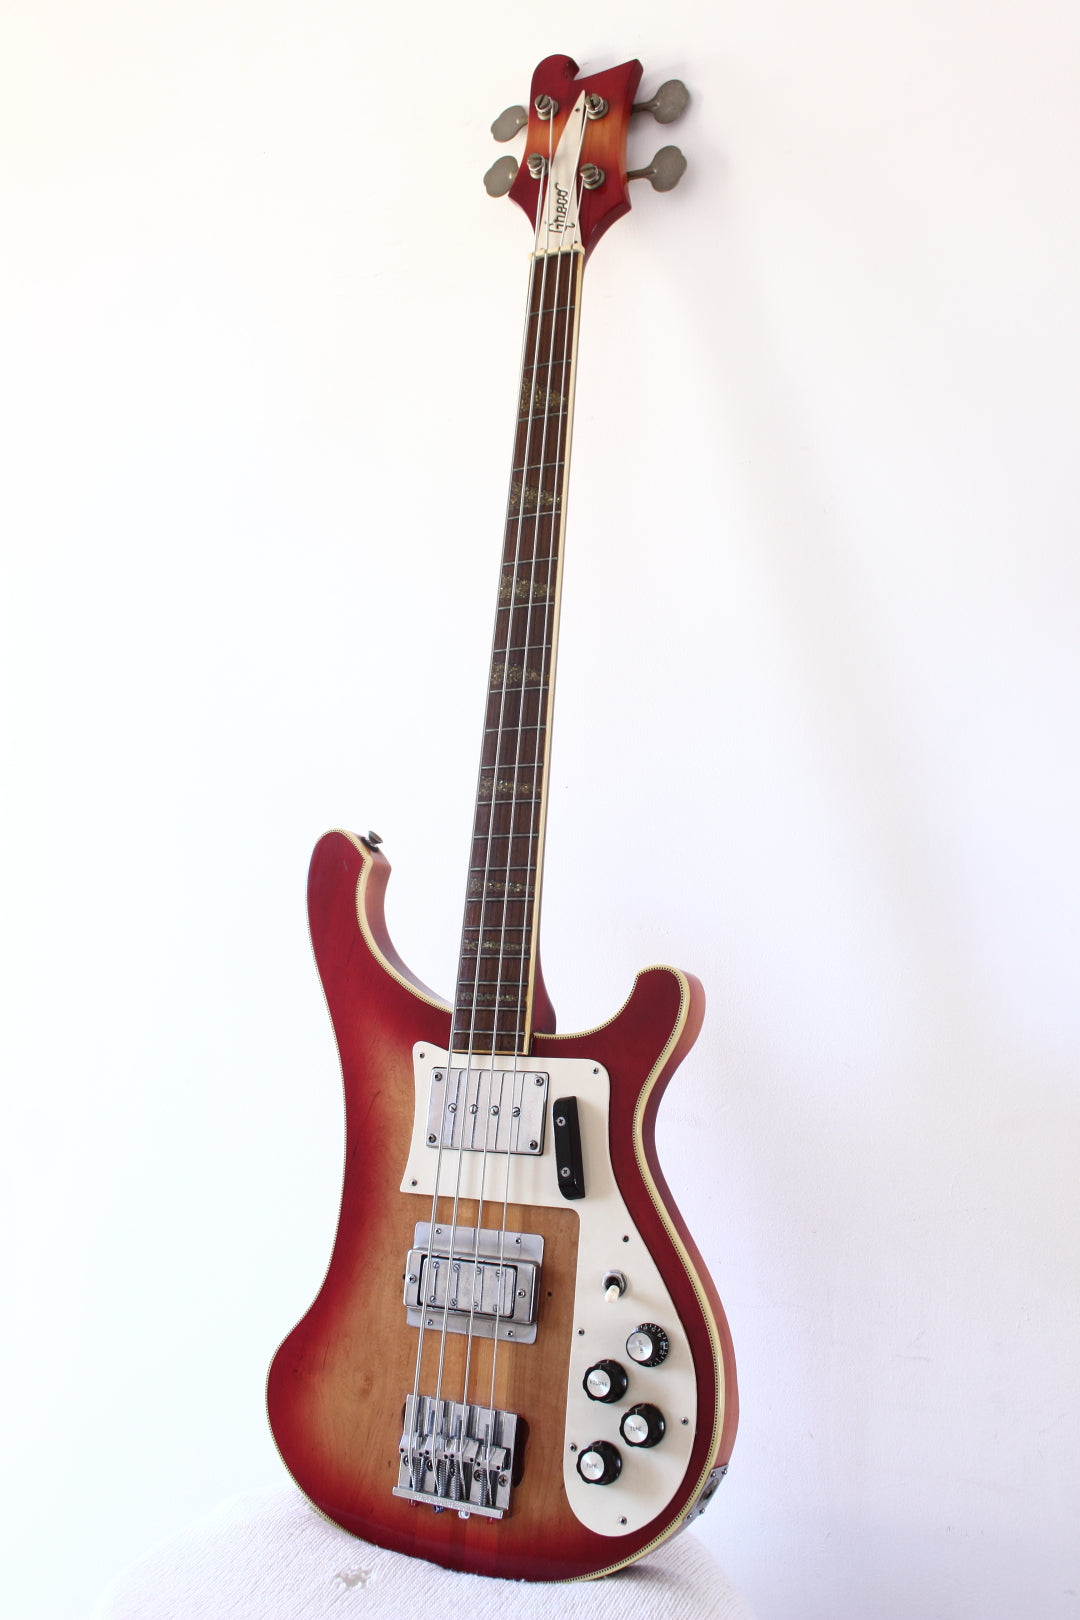 Greco RB1000 Ric-Style Bass Fireglo 1974